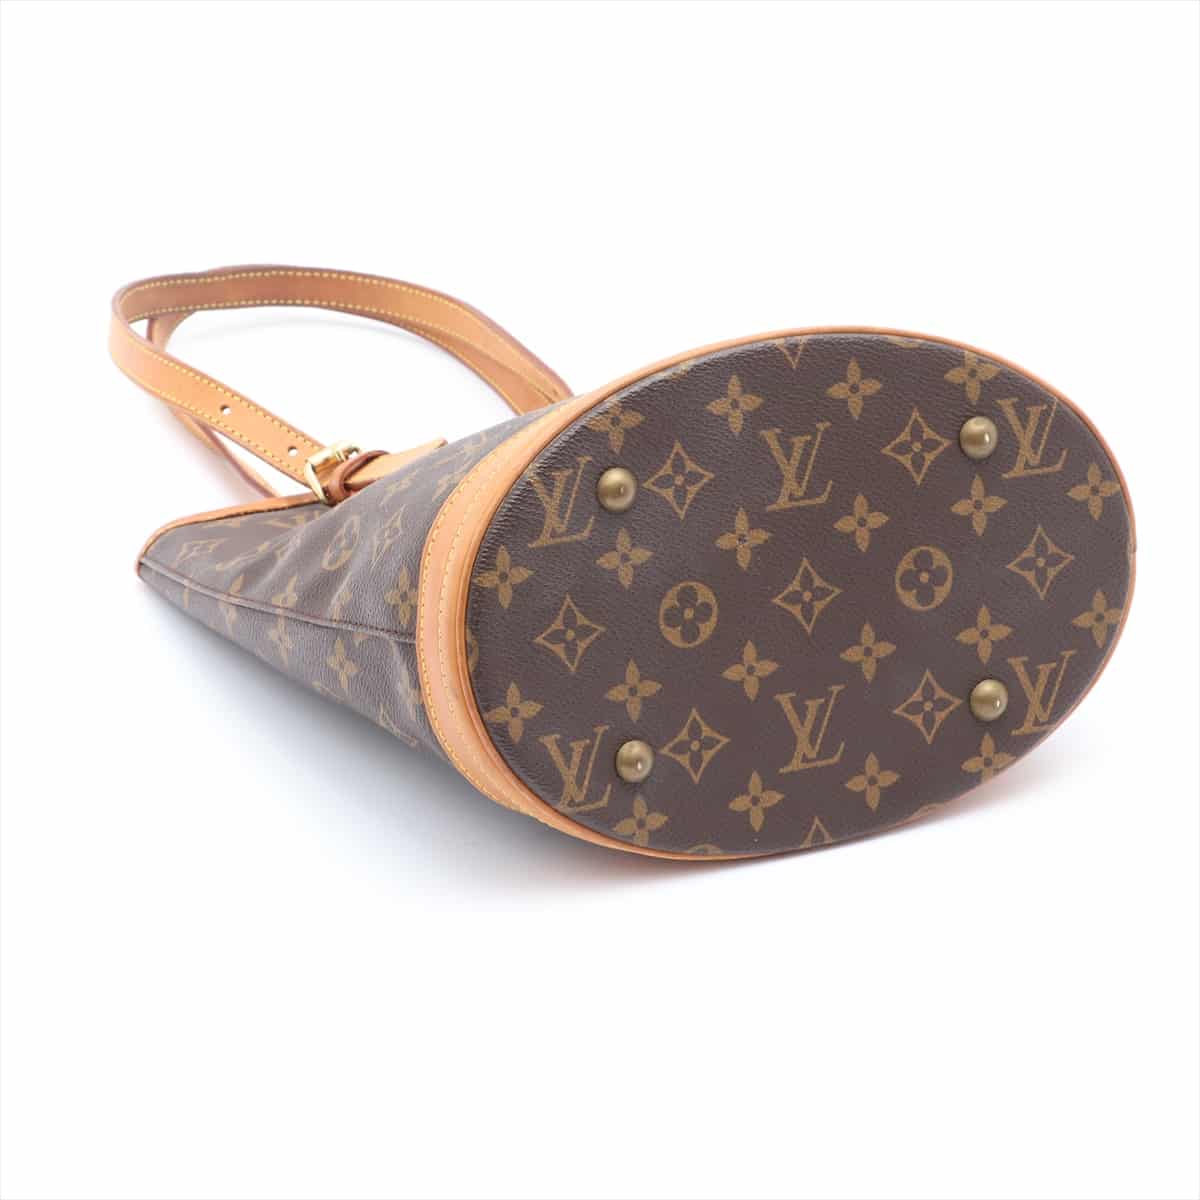 Louis Vuitton Monogram Bucket PM M42238 AR1000 with pouch smell Slightly solid inside